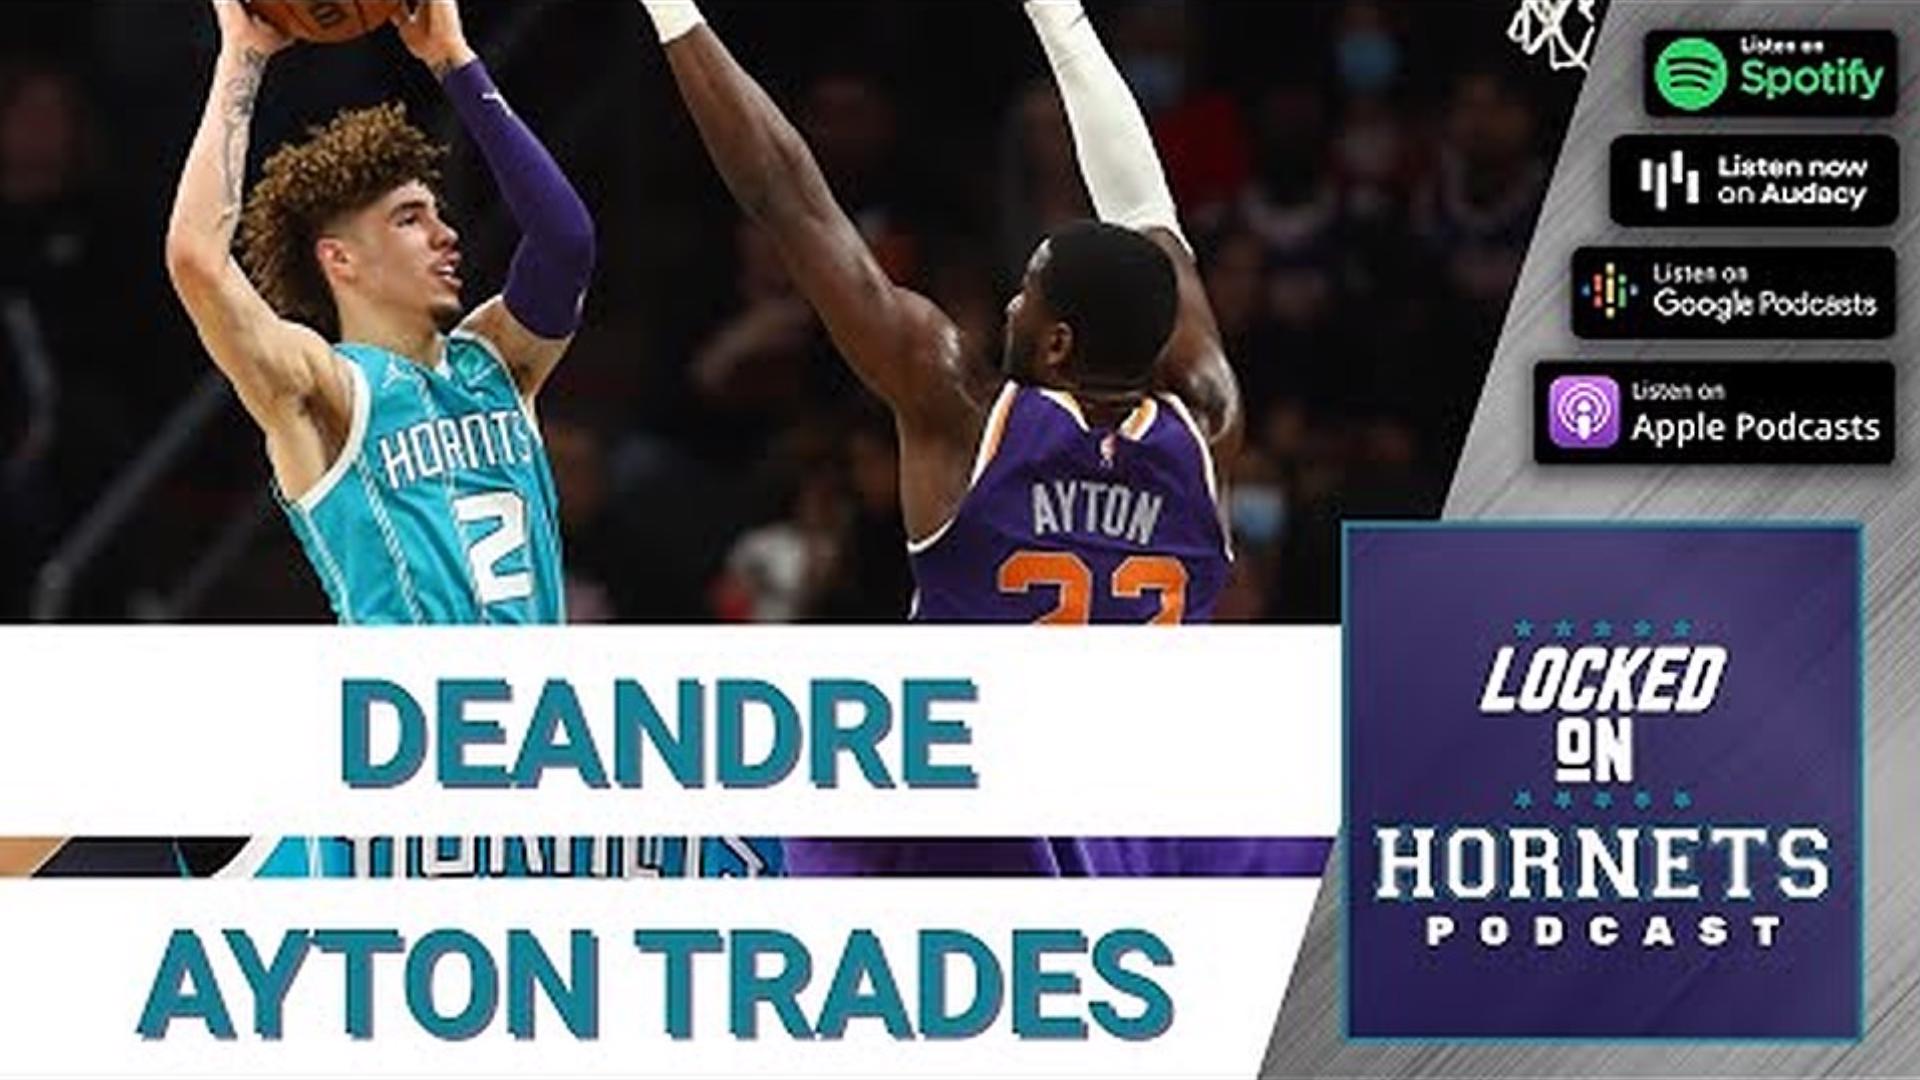 Charlotte has been mentioned as a potential destination for Phoenix Suns center Deandre Ayton after Ayton's time with Monty Williams in PHX appears to have soured.